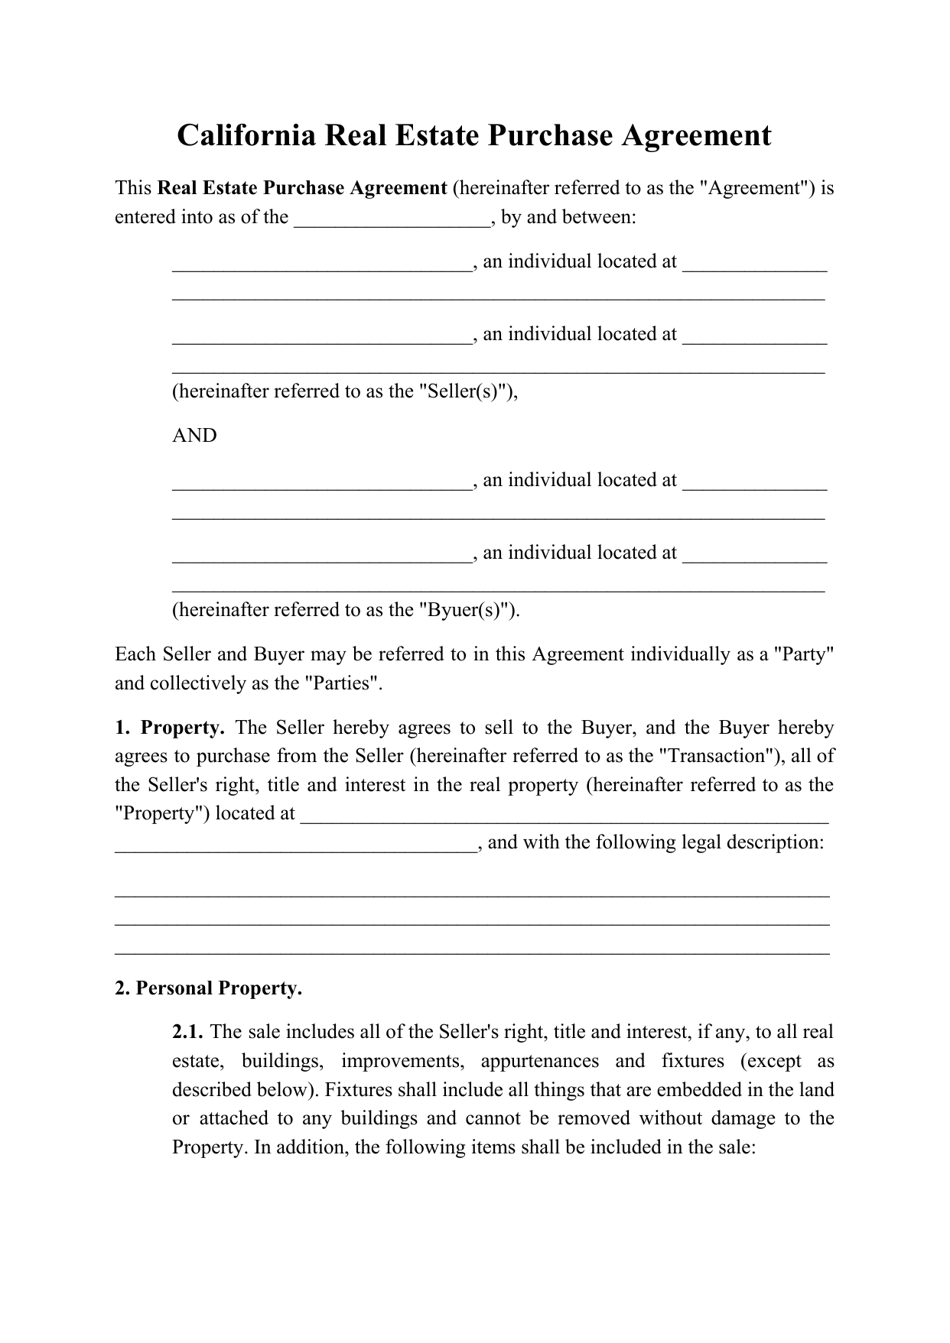 California Real Estate Purchase Agreement Template Fill Out Sign 